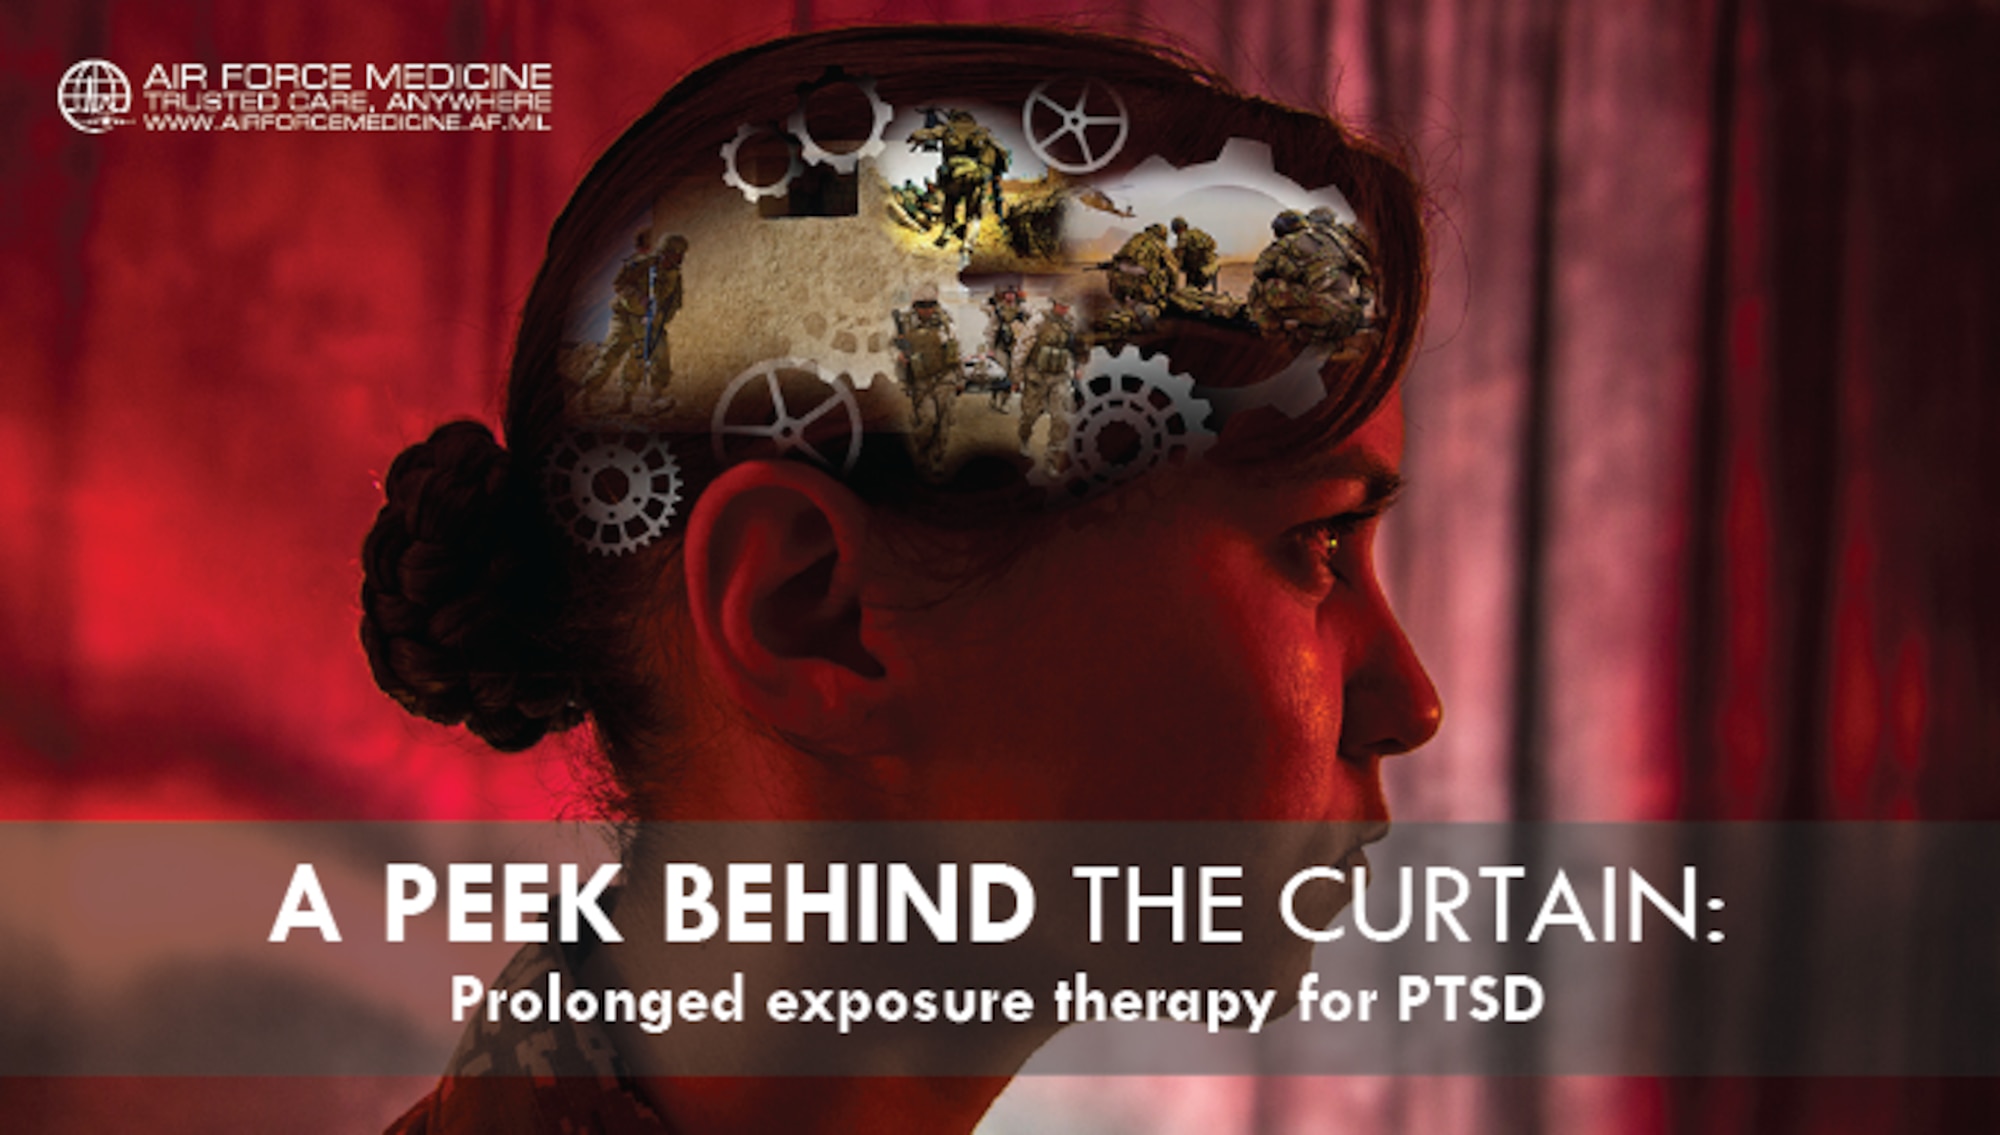 The symptoms associated with post-traumatic stress disorder (PTSD) can often be debilitating, significantly affecting a patient’s quality of life. Air Force mental health professionals have successfully treated many Airmen with the use of prolonged exposure therapy. Through this collaborative therapy, the patient is safely and gradually exposed to trauma-related memories and situations that have been avoided. The eventual goal is to alter the patient’s relationship with and reaction to the traumatic event so it no longer affects their quality of life and ability to do their job. (U.S. Air Force graphic by Josh Mahler)